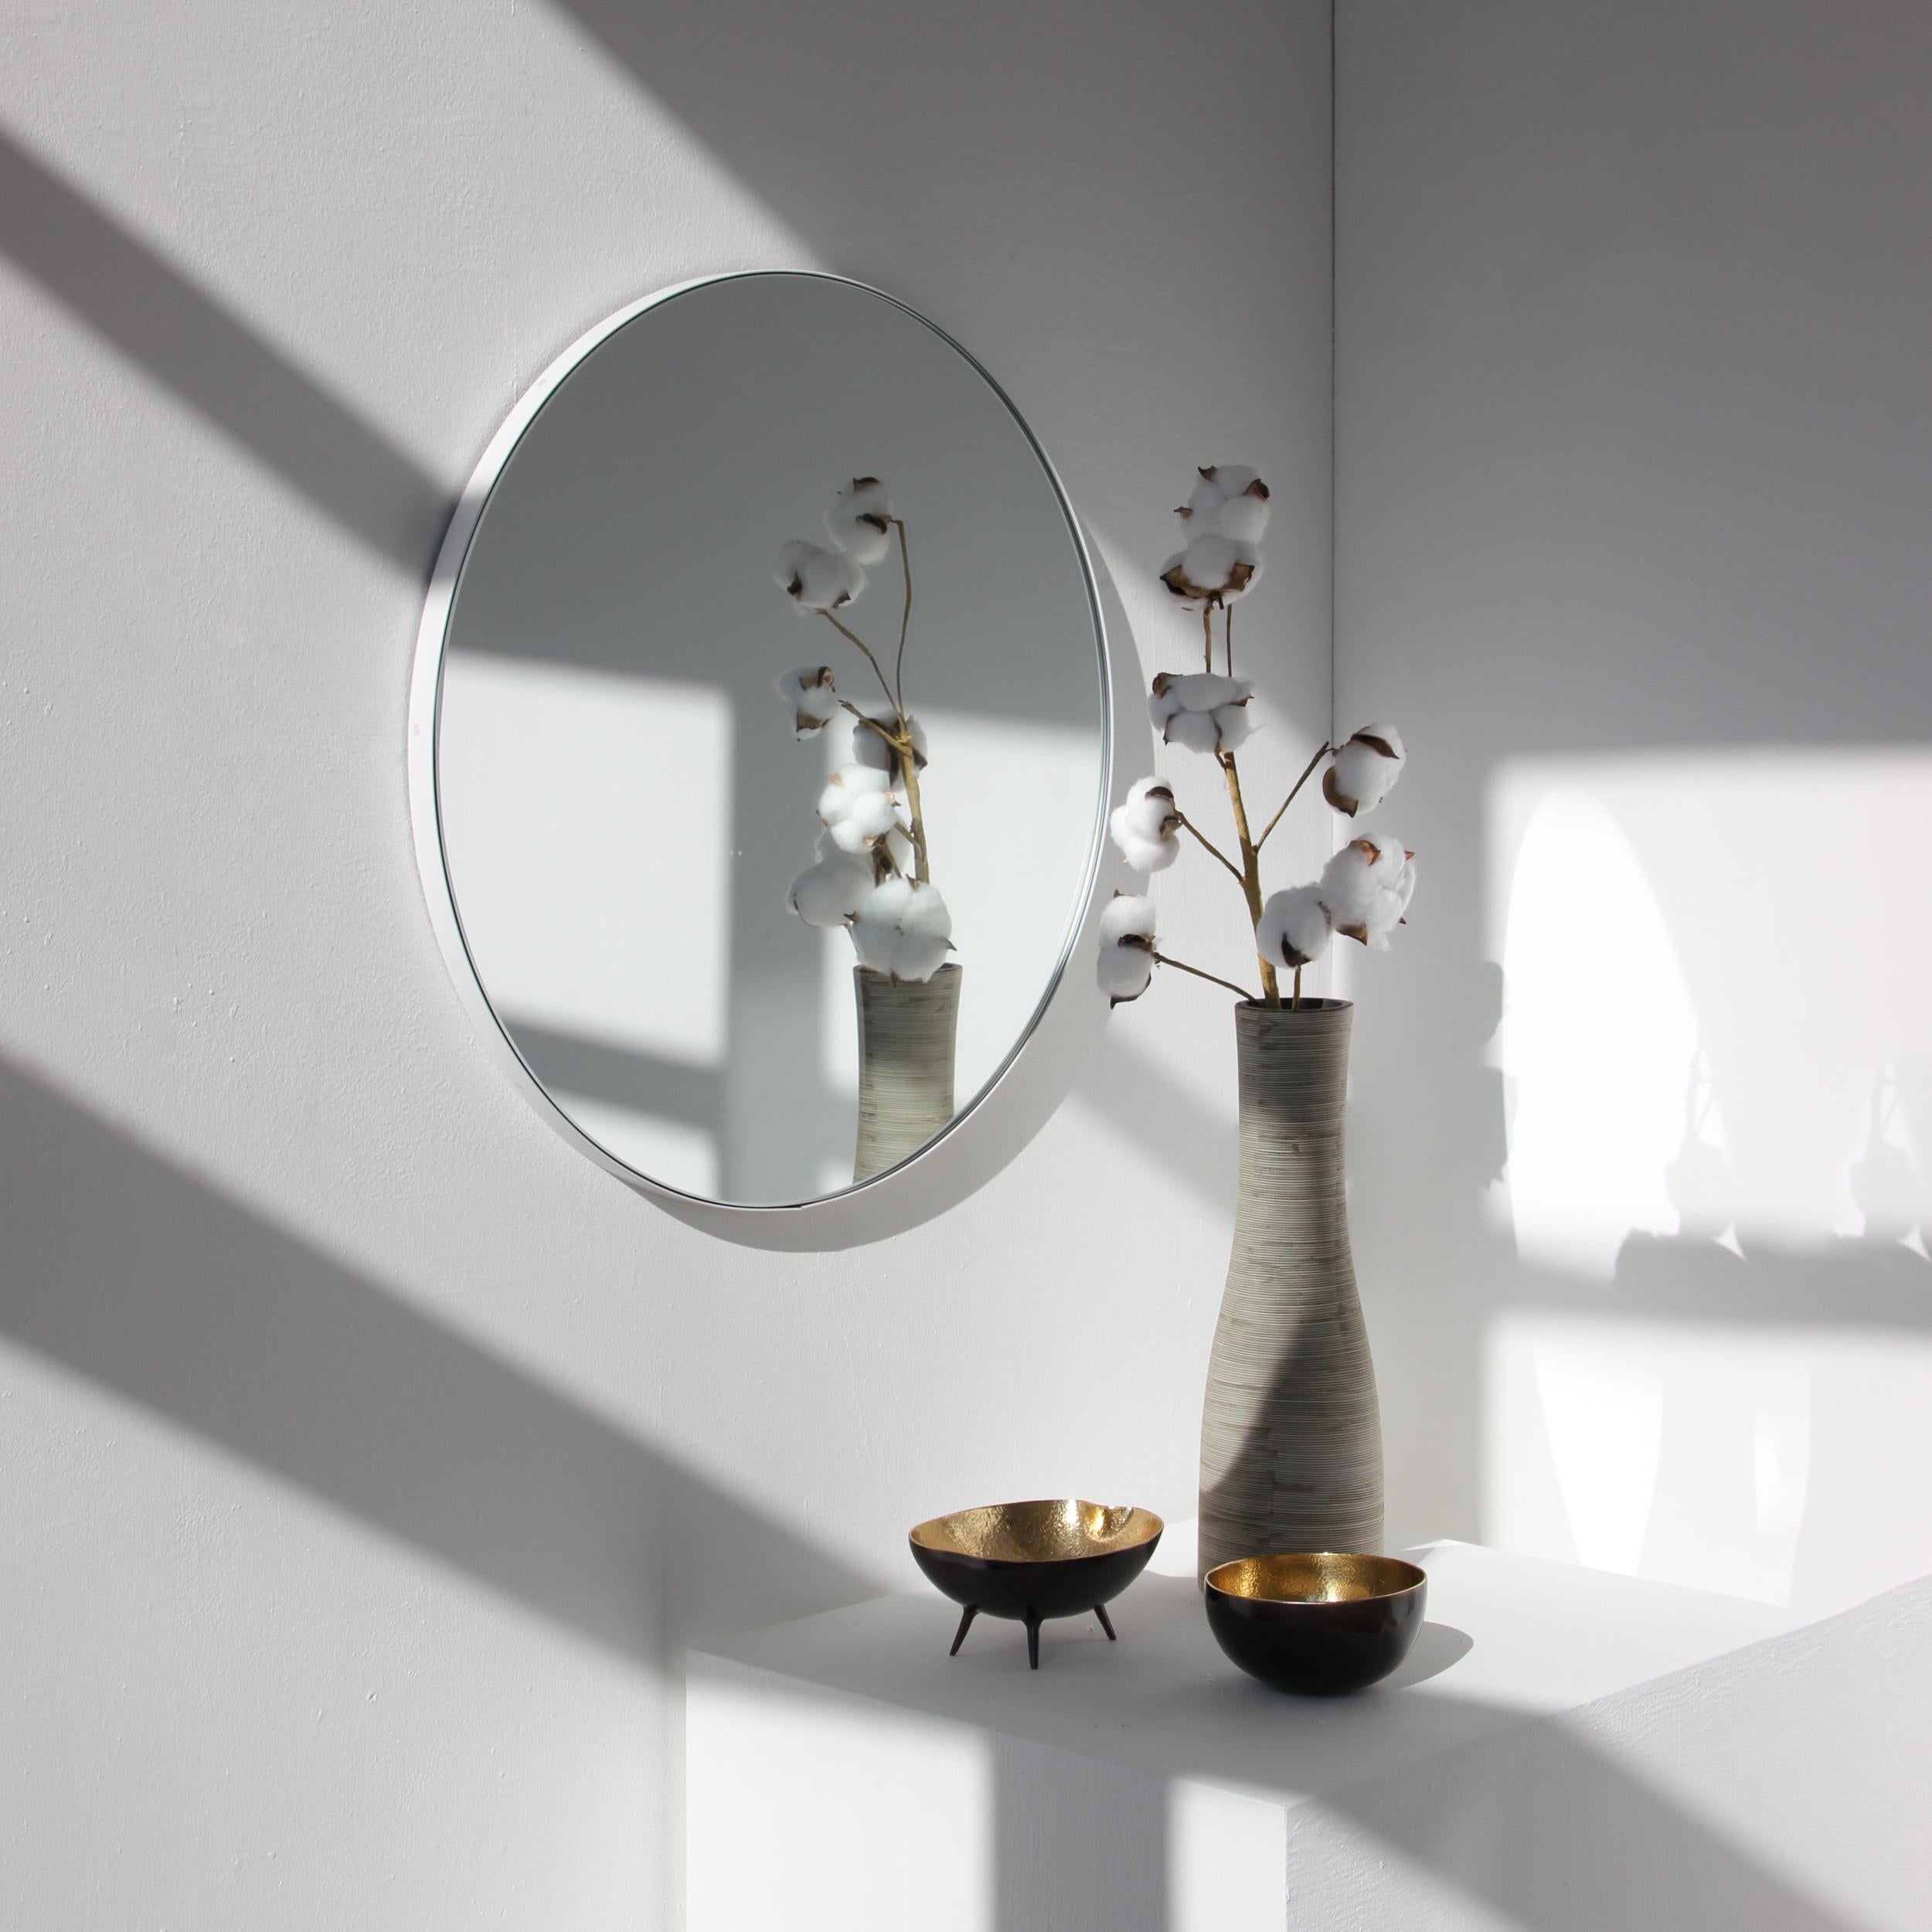 Minimalist round mirror with a smart white powder coated aluminium frame. Designed and handcrafted in London, UK. Measure: 80cm Diameter.

Fitted with a brass hook or an aluminium z-bar depending on the size of the mirror. Also available on demand